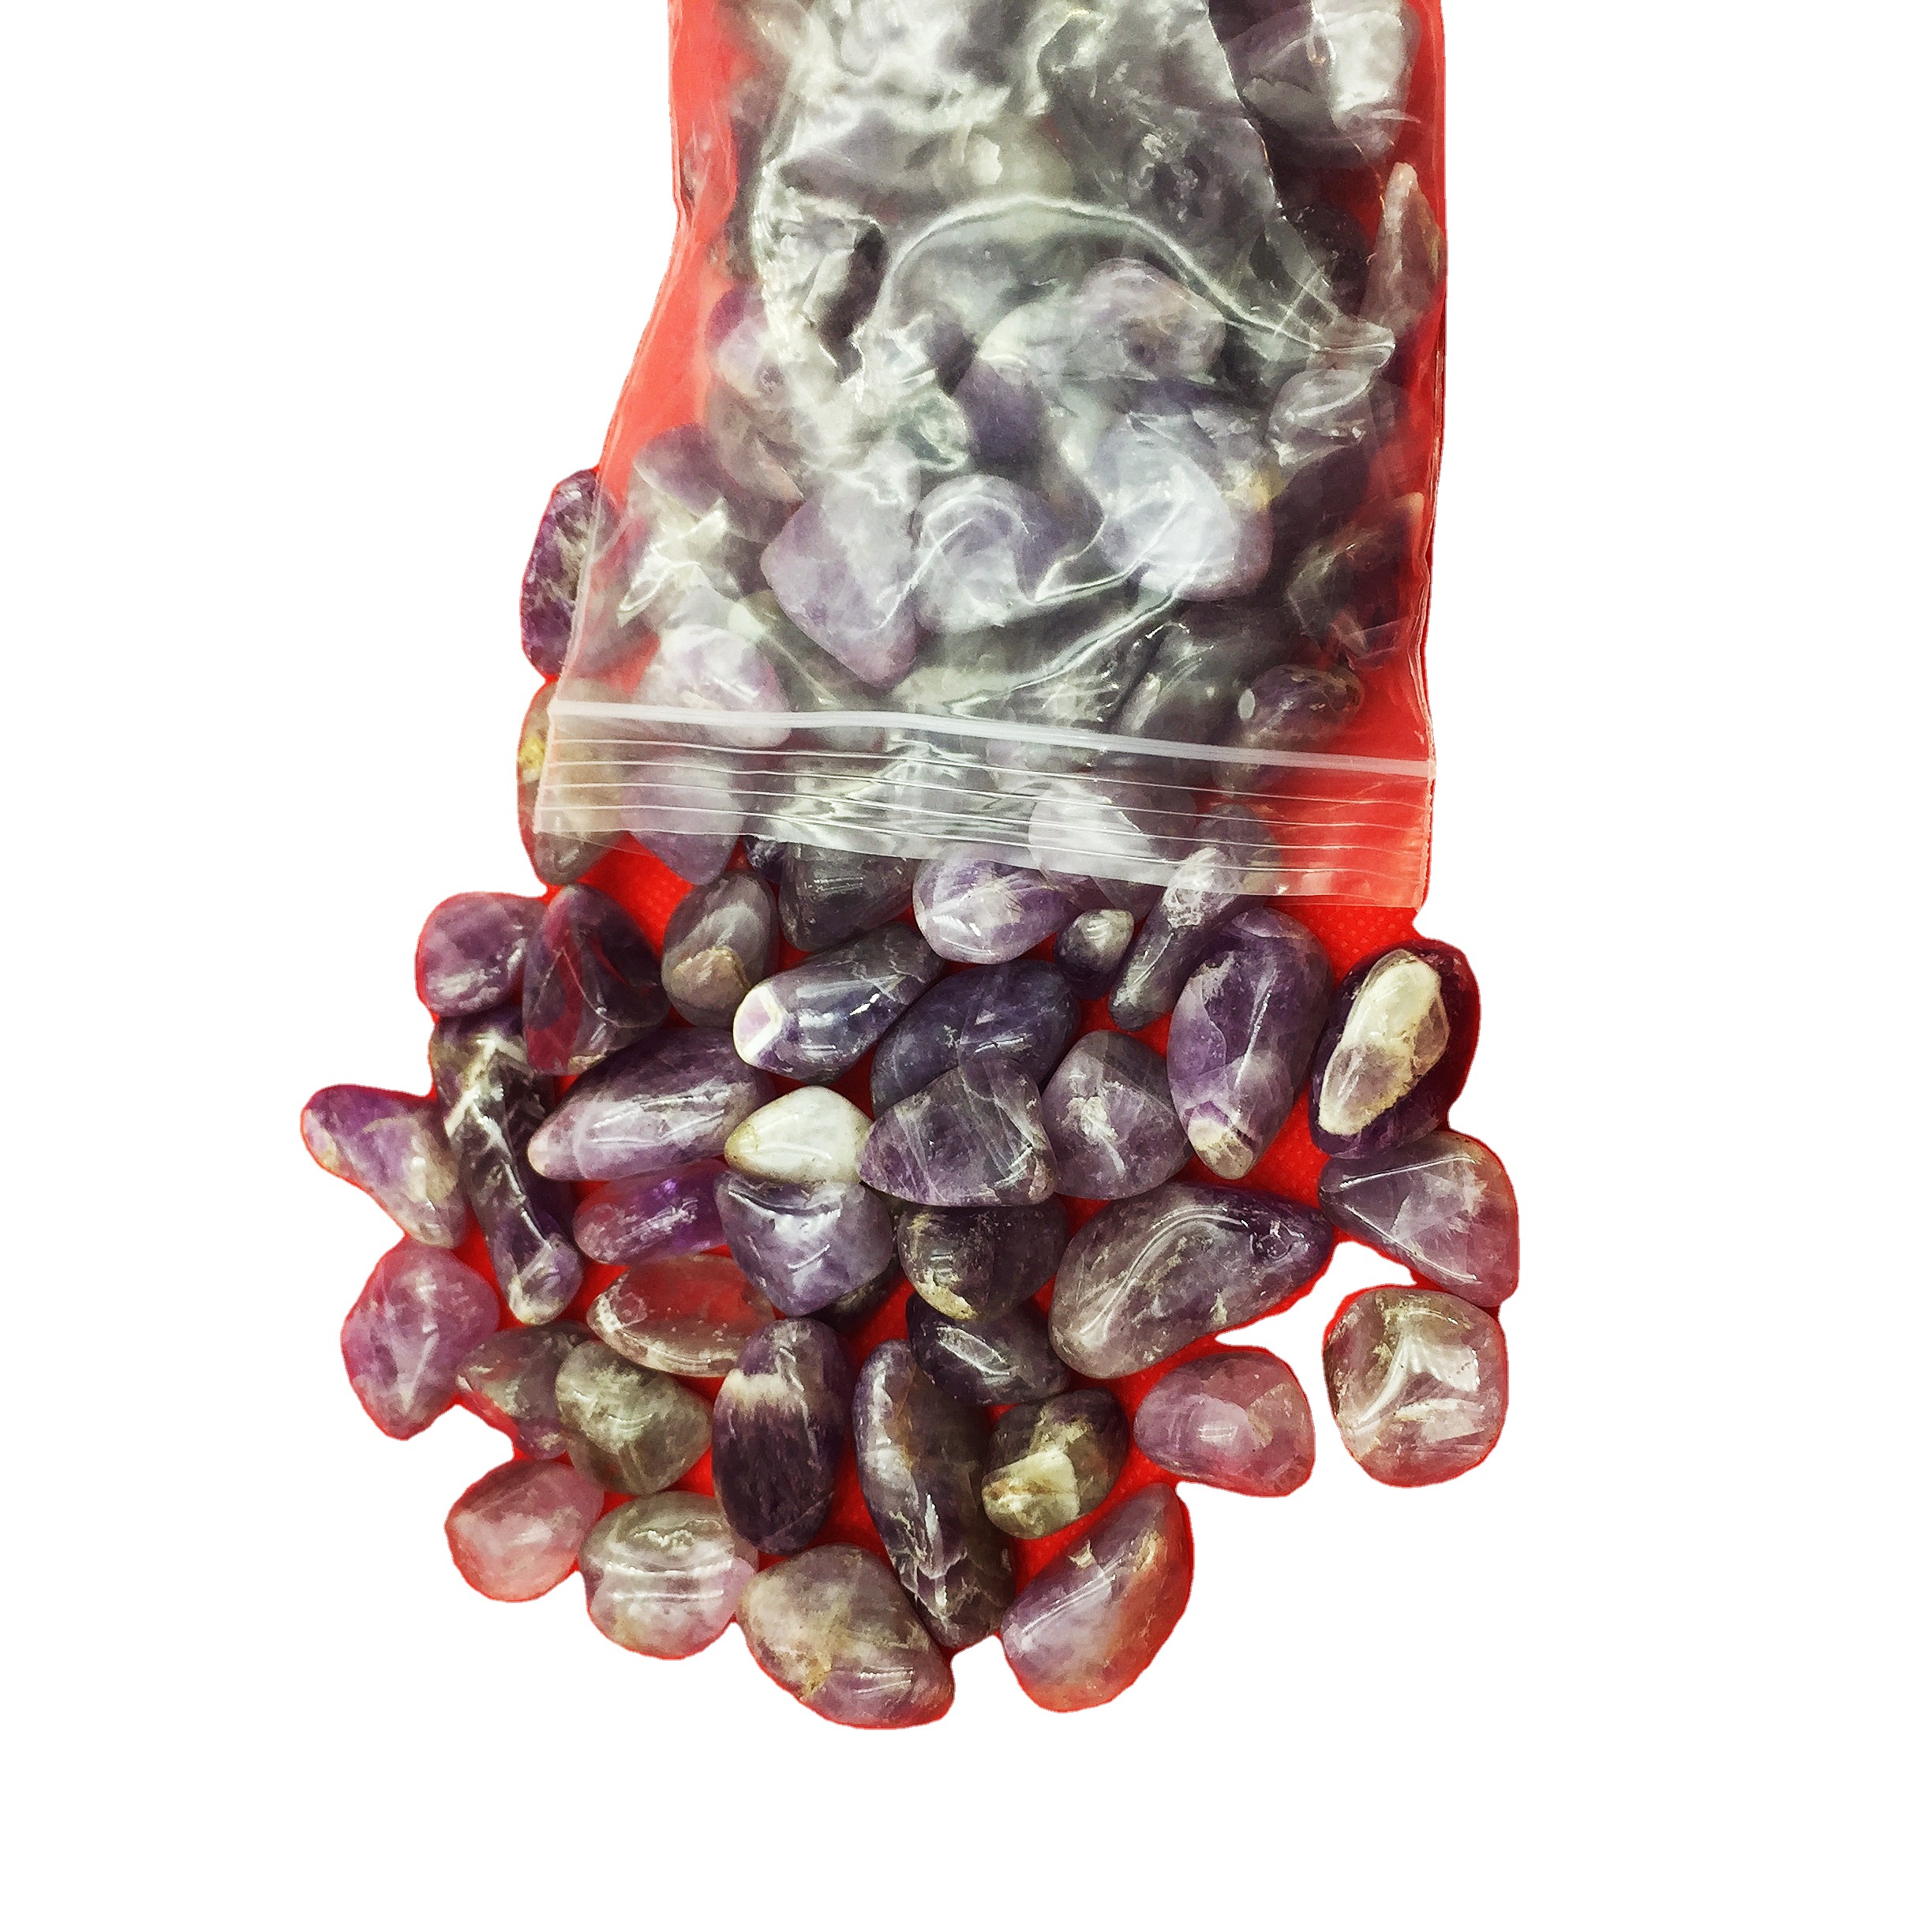 Wholesale Natural Polished amethyst crushed stone, Crystals  gravel degaussing Stones for Fish tank decoration